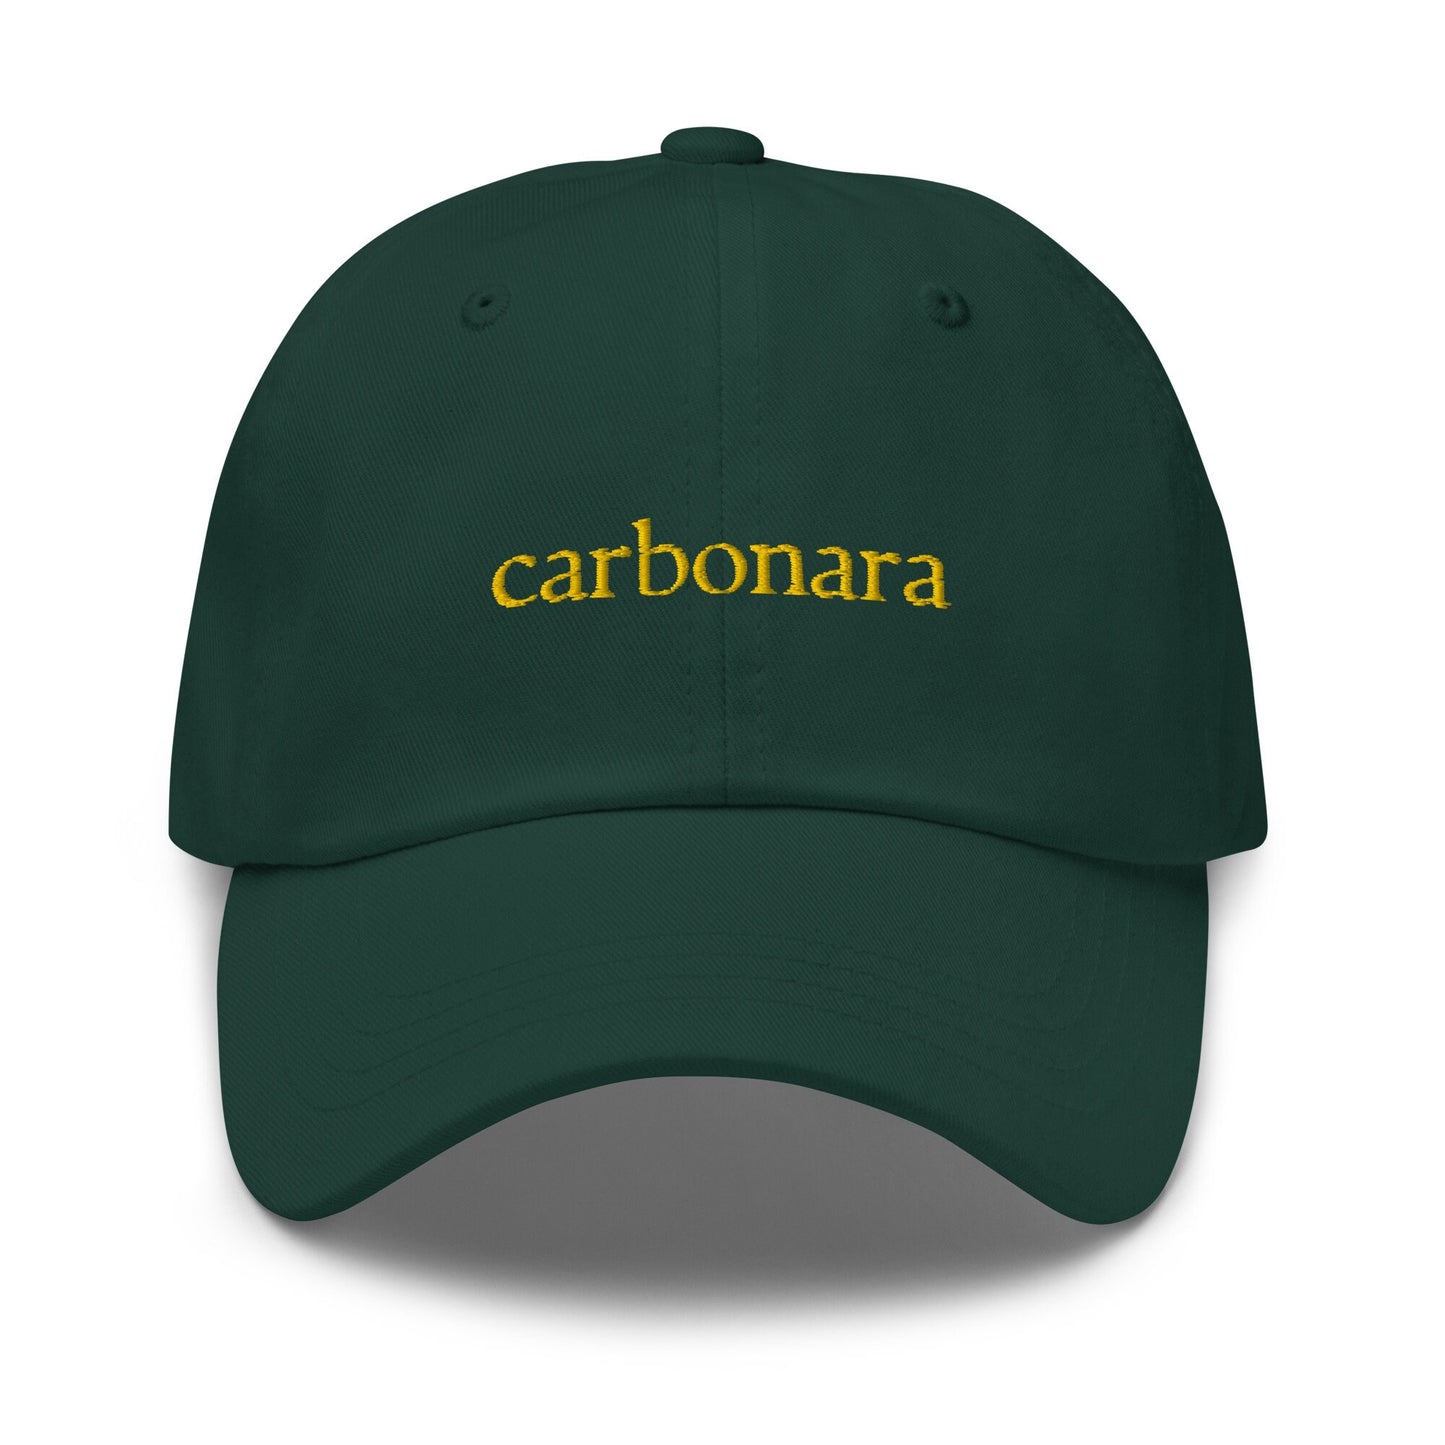 Carbonara Hat - Authentic Italian Food Fan gift - Pasta Carbonara Stans Only- Cotton embroidered Cap